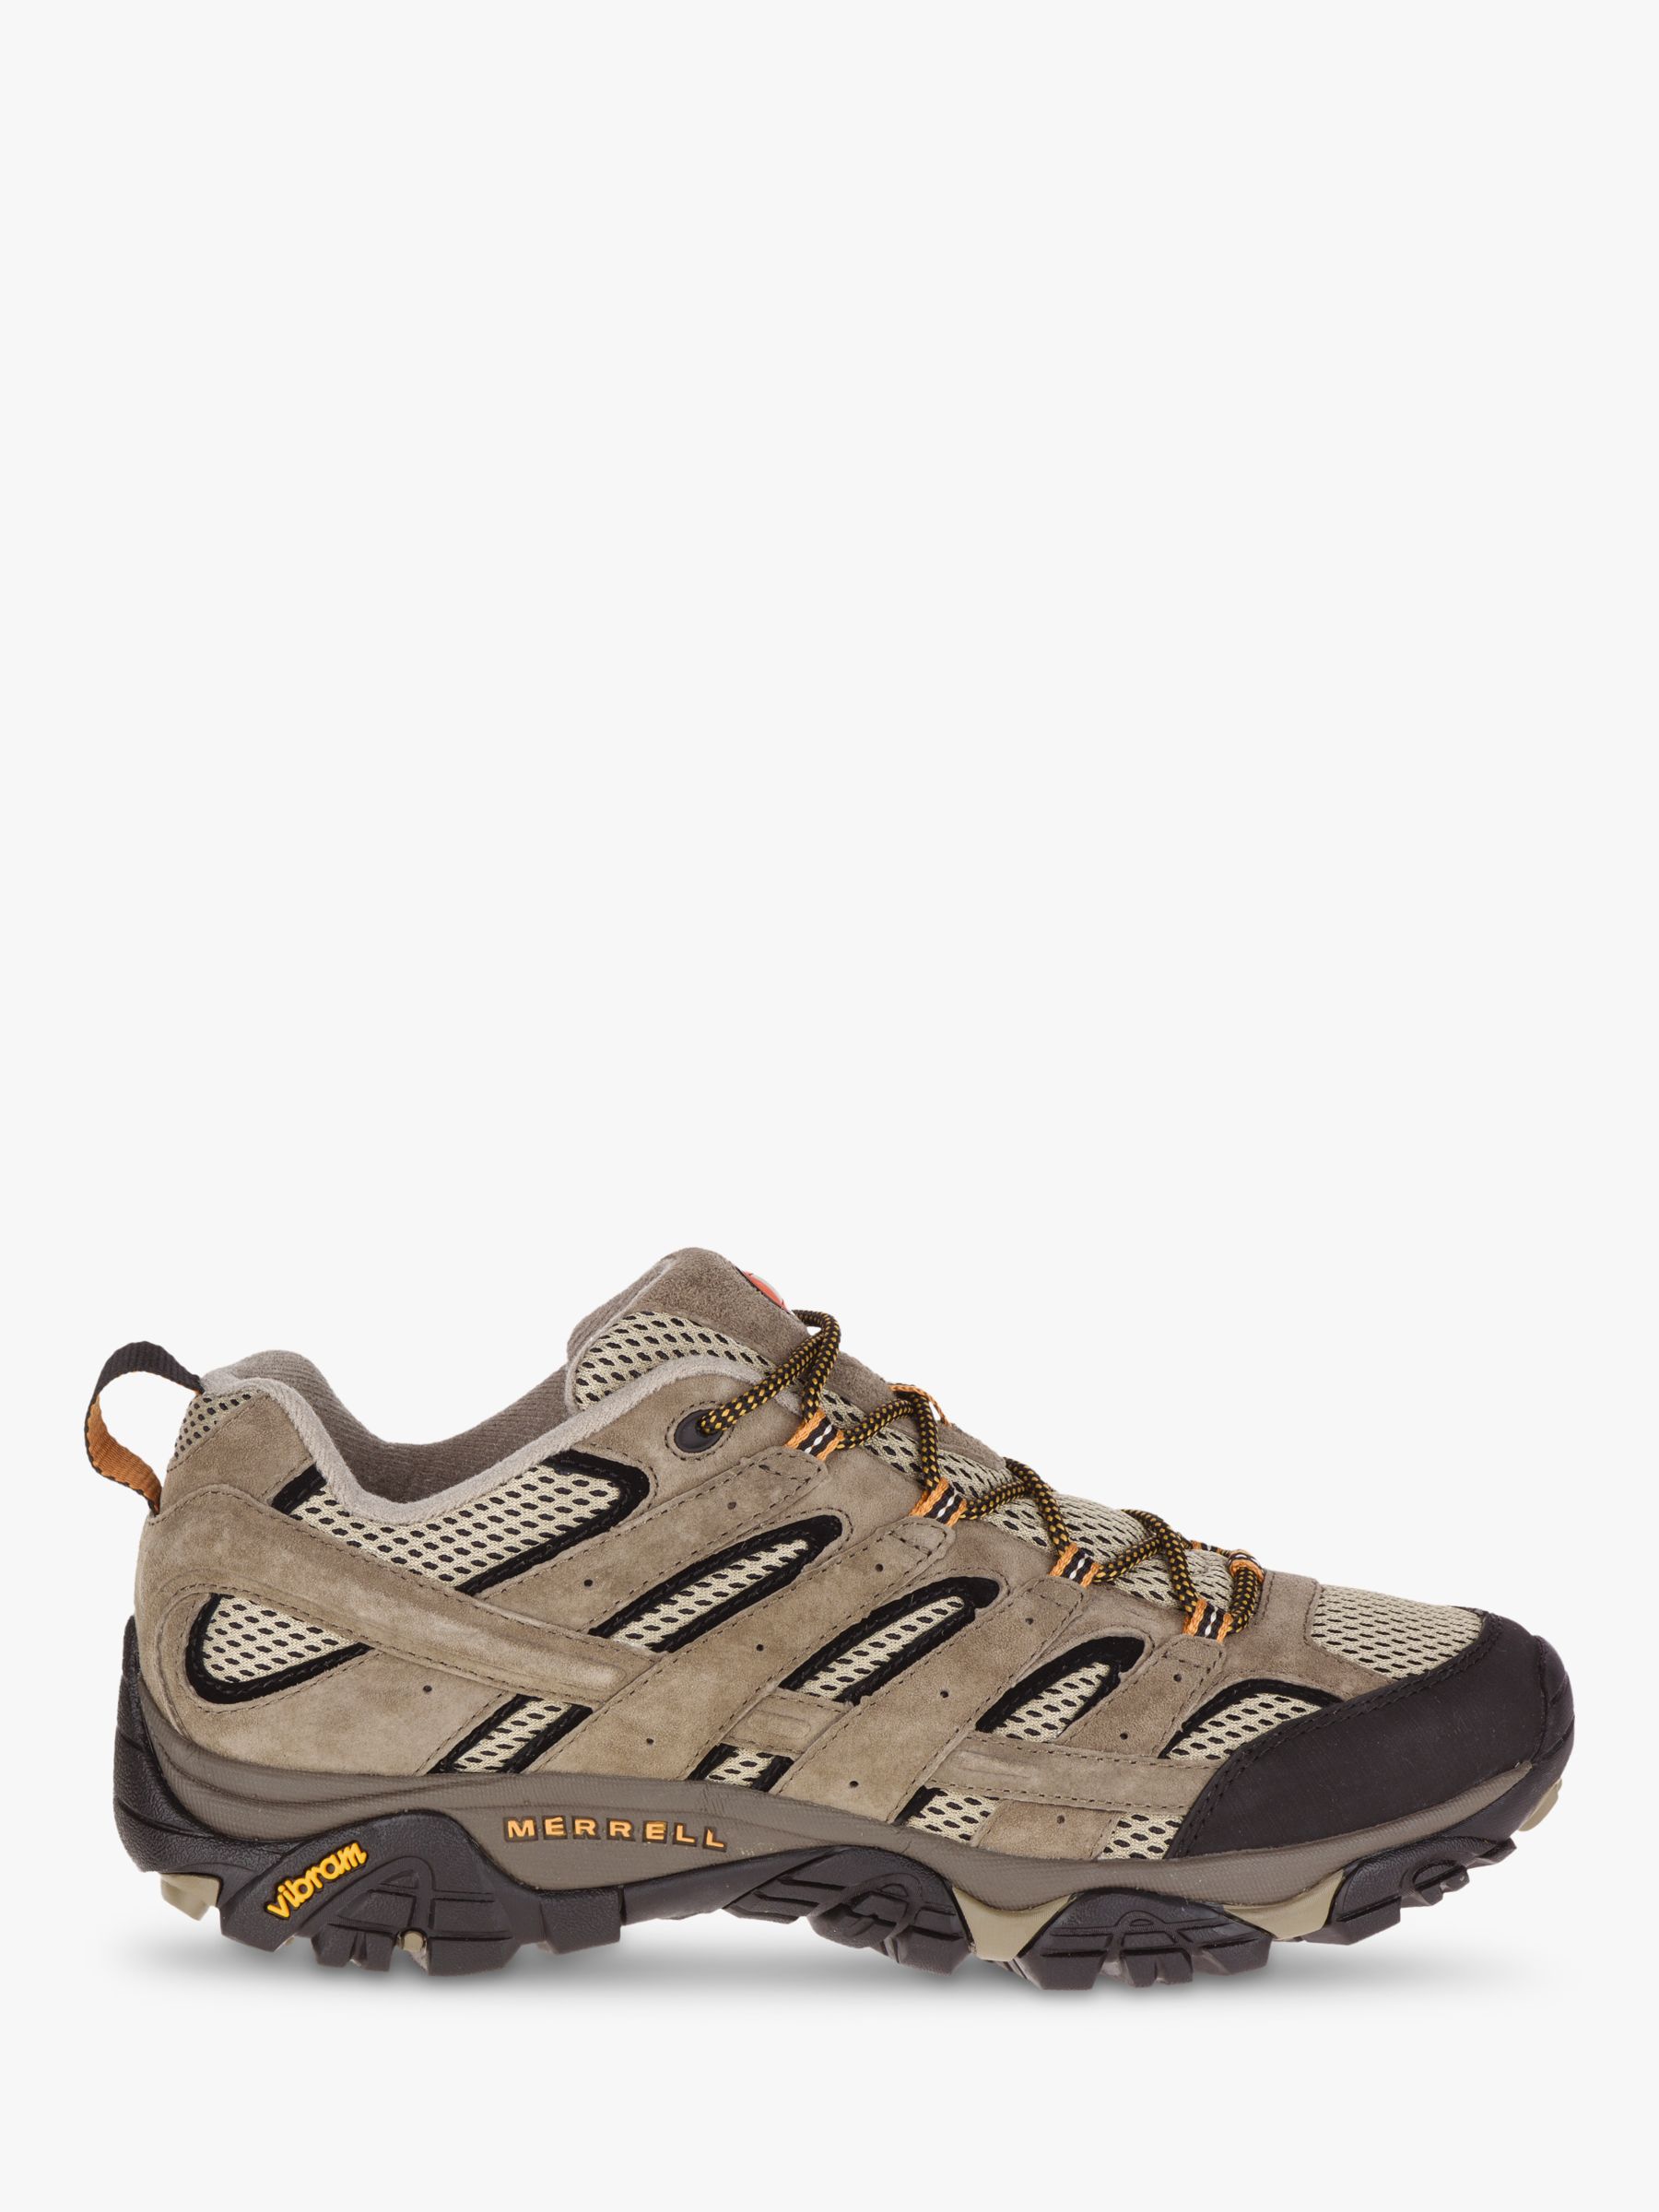 discount merrell hiking boots